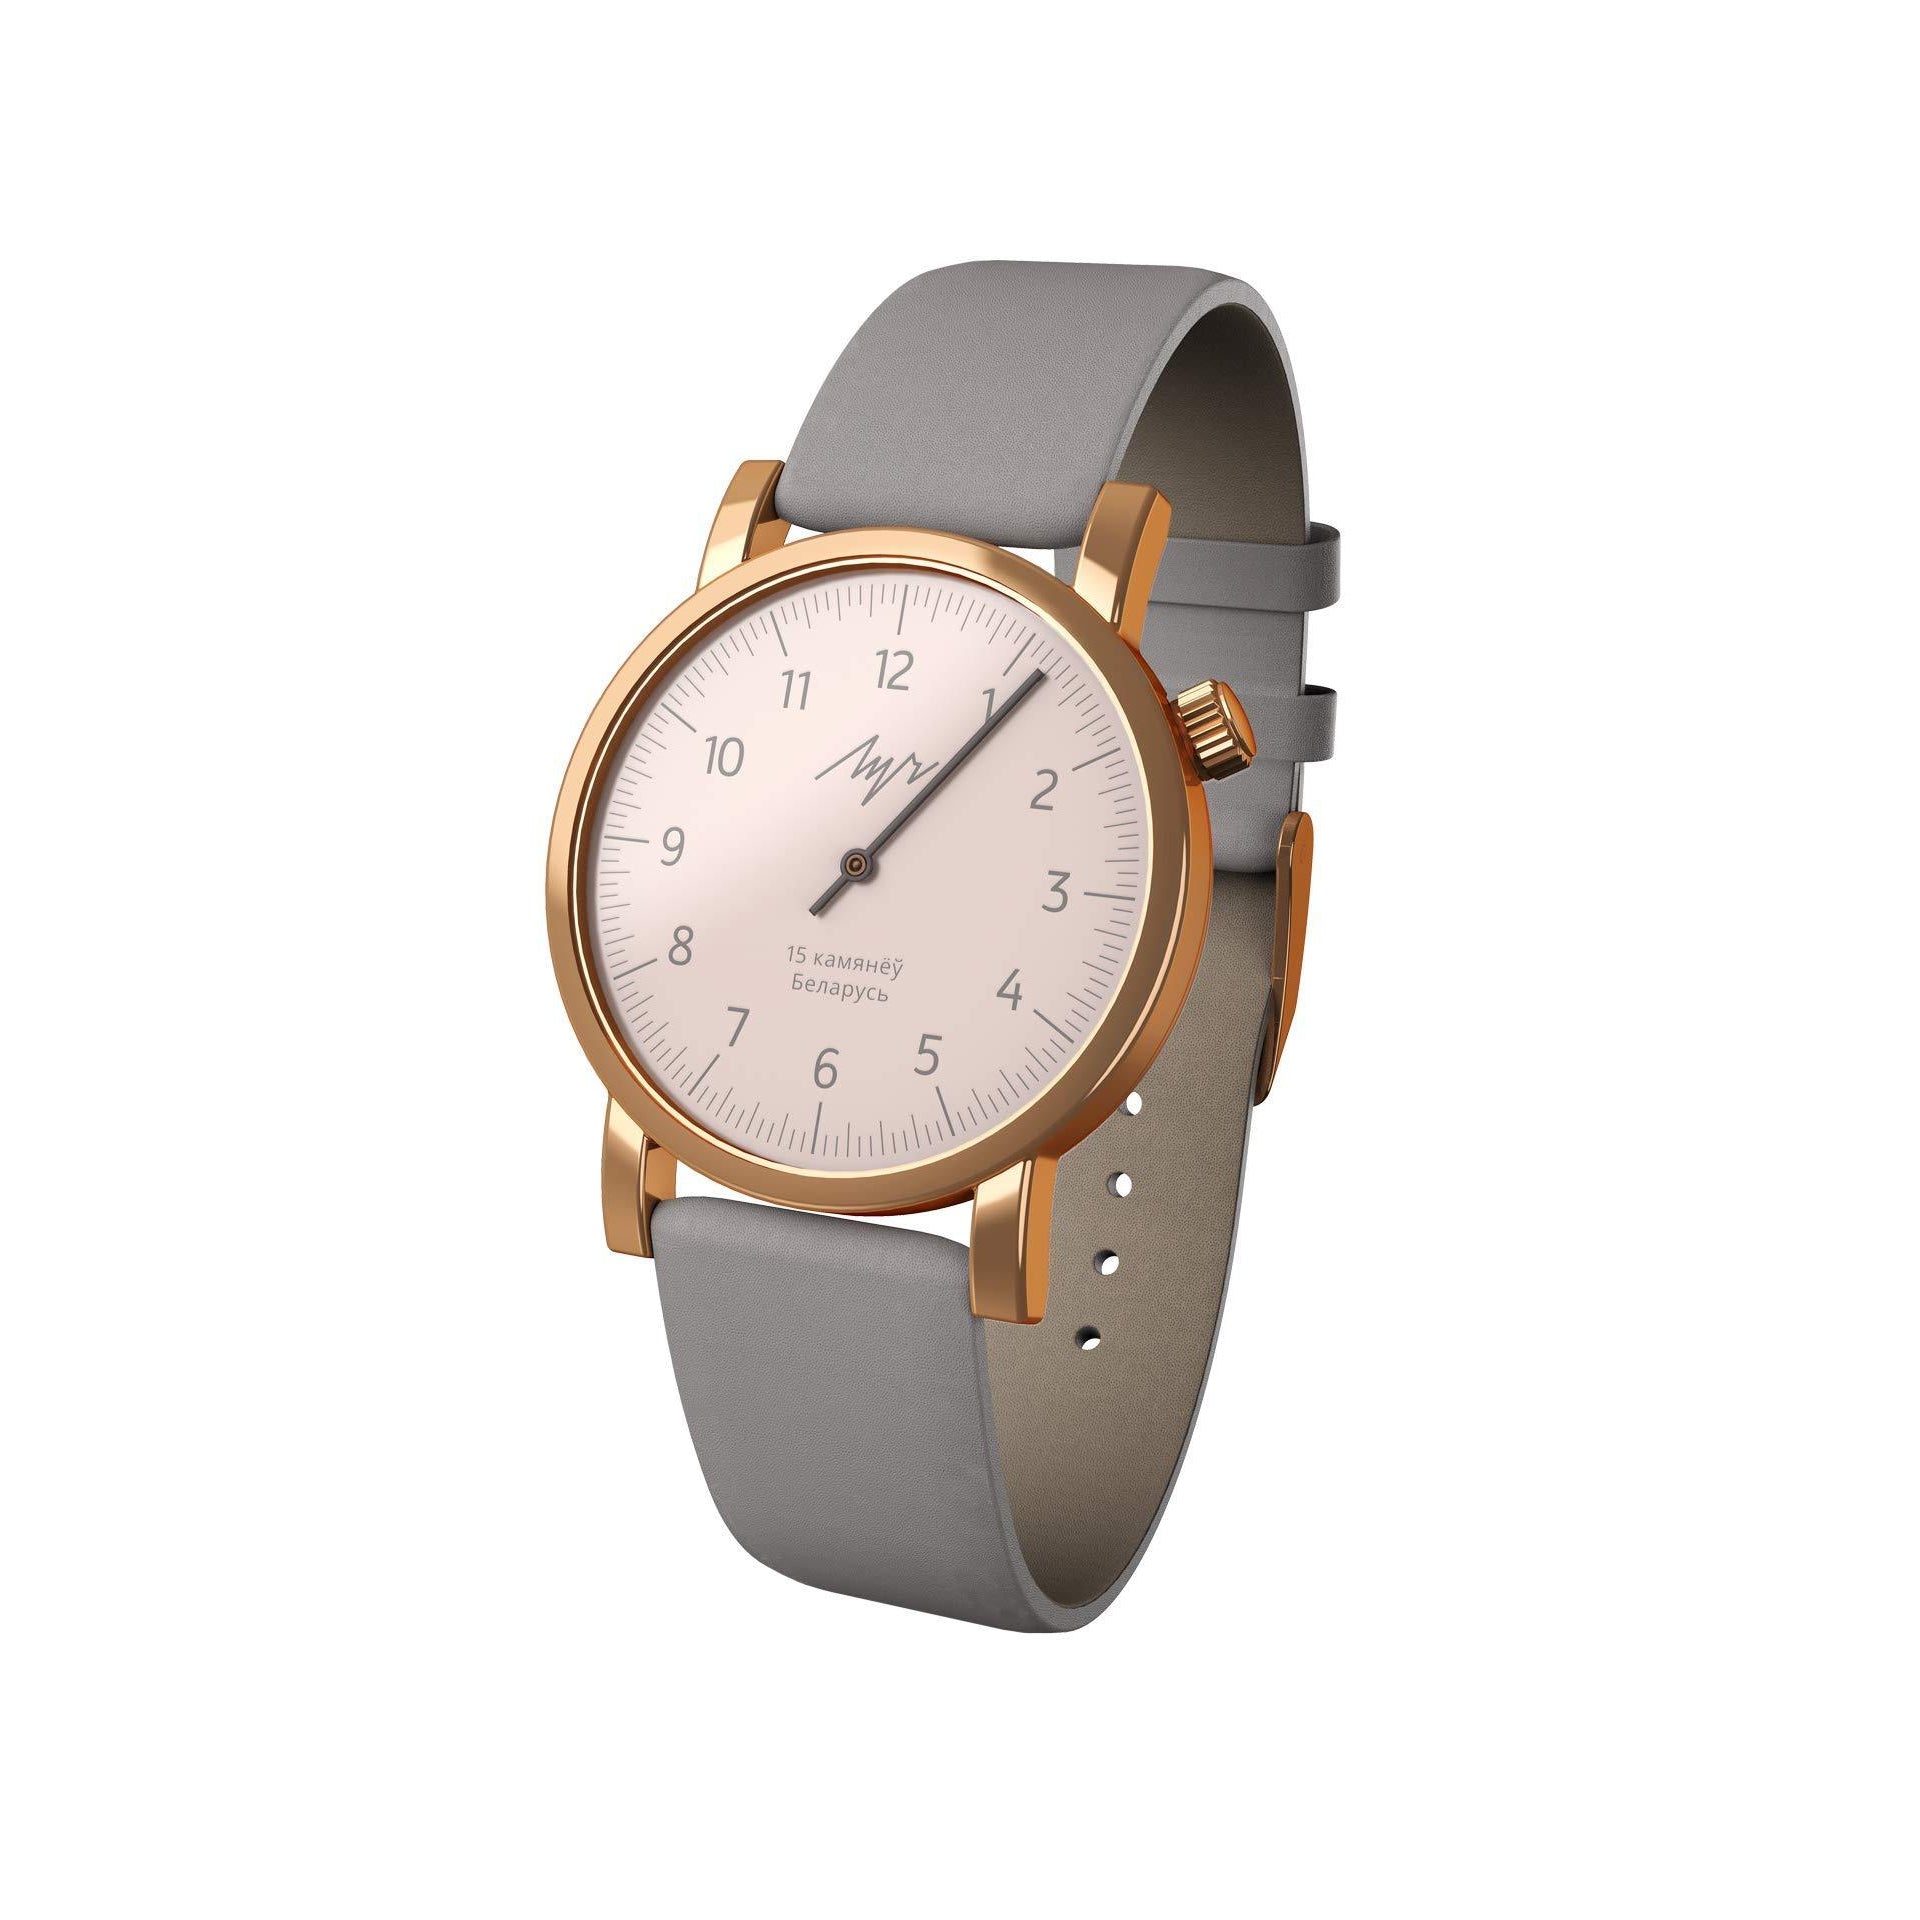 Luch Handwinding One-Handed Watch, Gold Plated - 015236757 ...